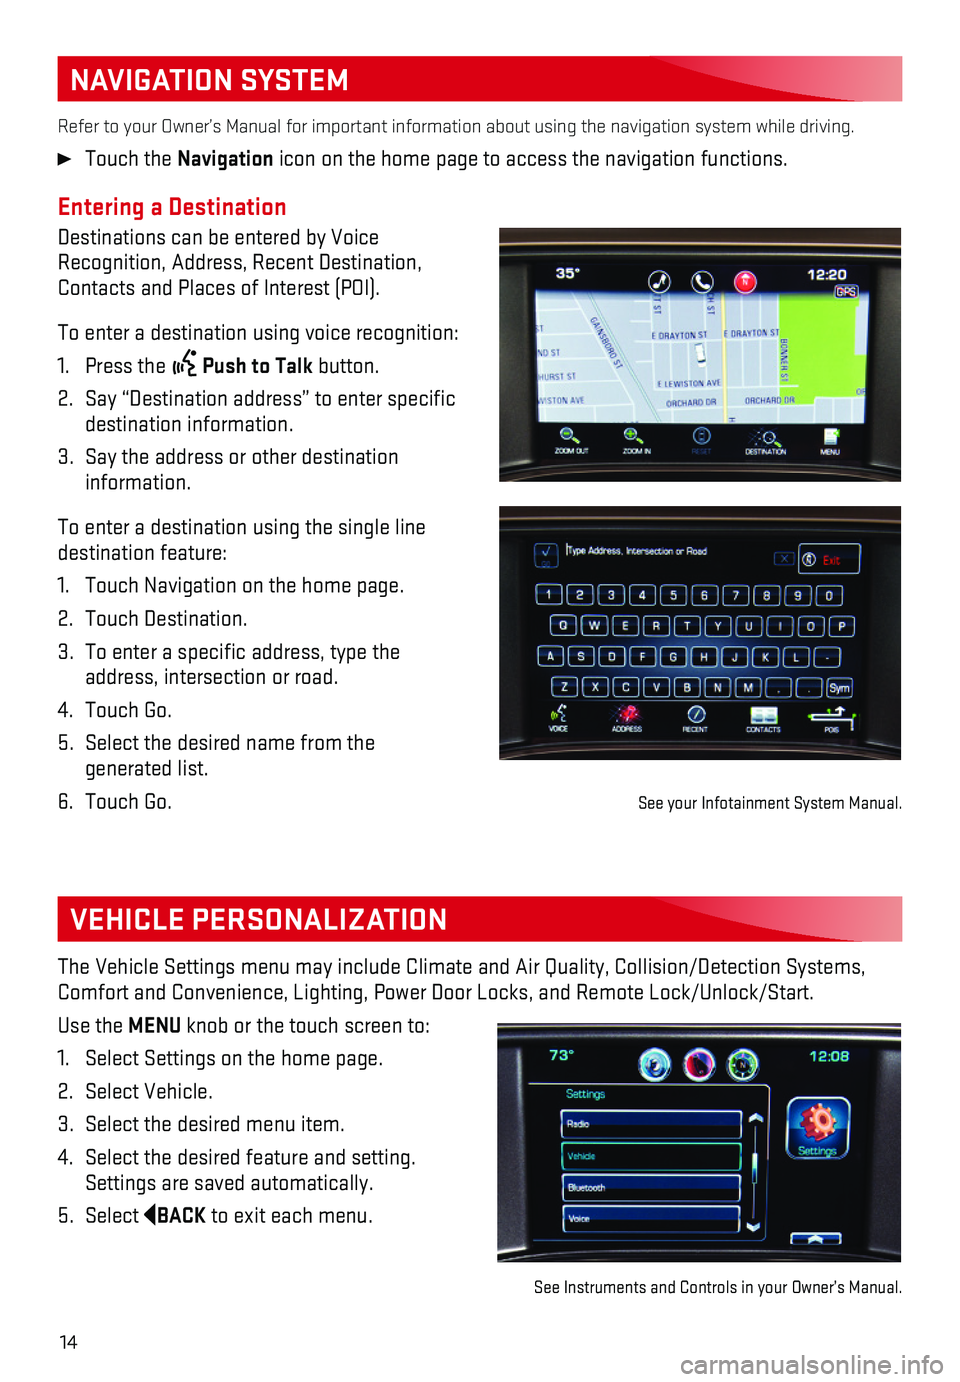 GMC SIERRA 2018  Get To Know Guide 14
NAVIGATION SYSTEM
Entering a Destination
Destinations can be entered by Voice Recognition, Address, Recent Destination, Contacts and Places of Interest (POI).
To enter a destination using voice  re